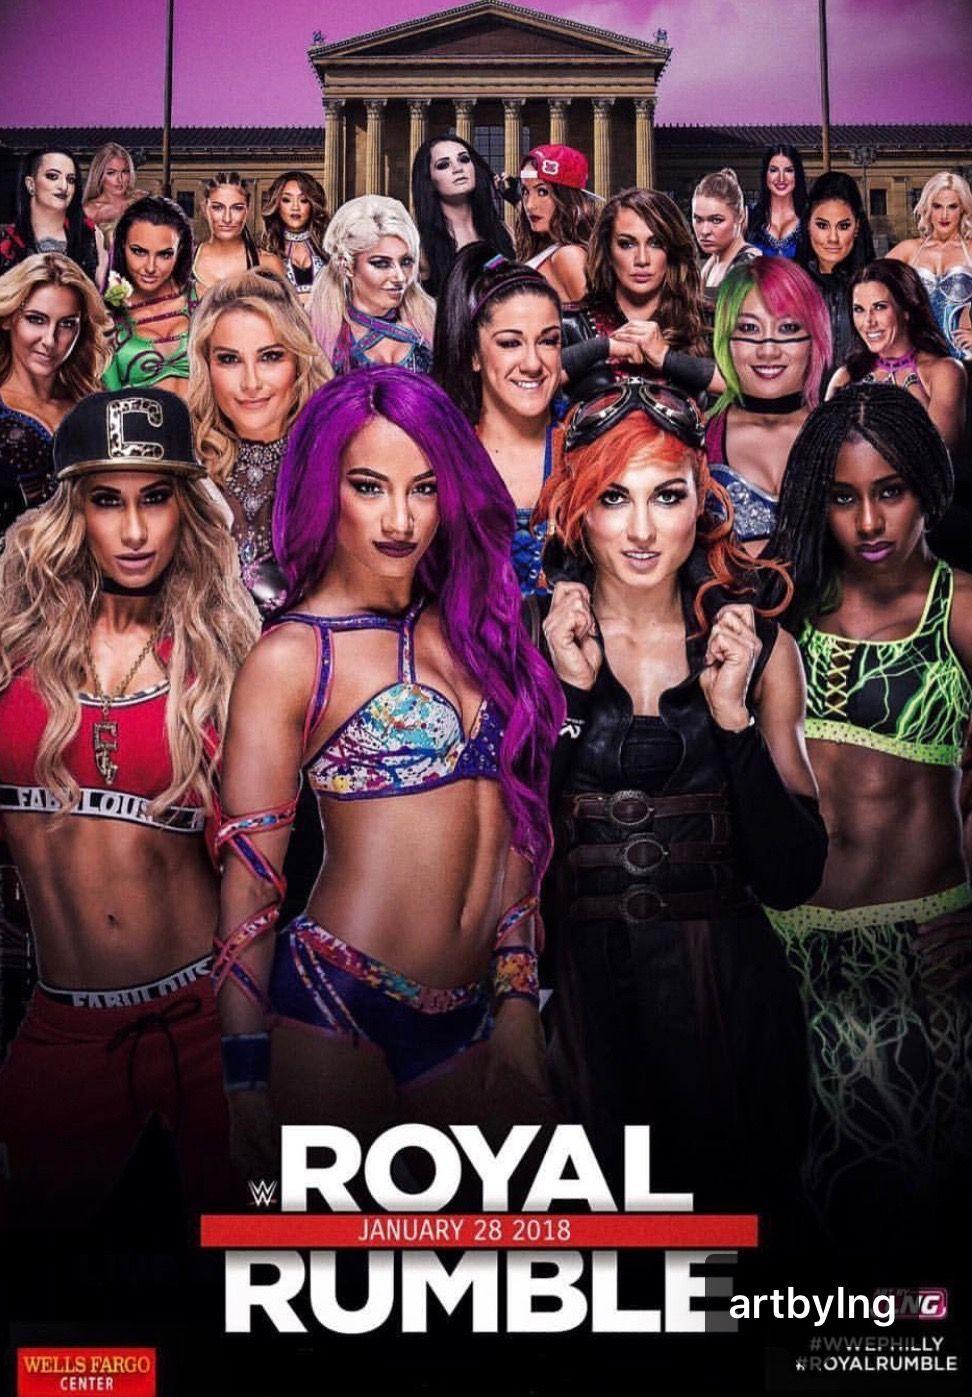 The historic 1st ever women's royal rumble with all these powerful